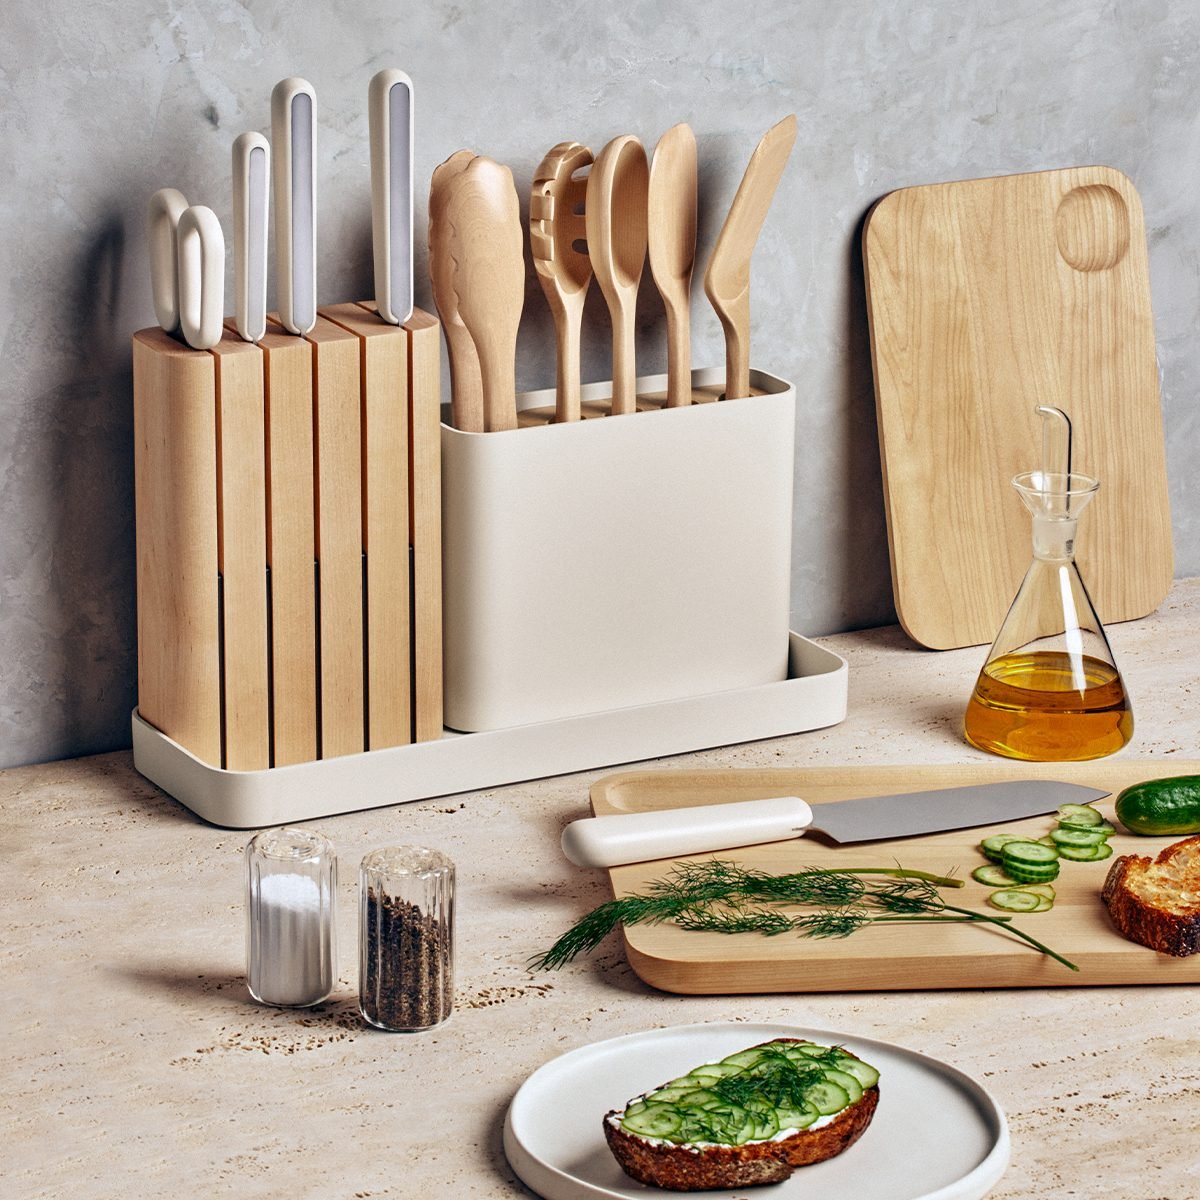 https://www.tasteofhome.com/wp-content/uploads/2023/08/Caraway-Released-a-Prep-Set-and-Cutting-Boards_FT_via-amazon.com_.jpg